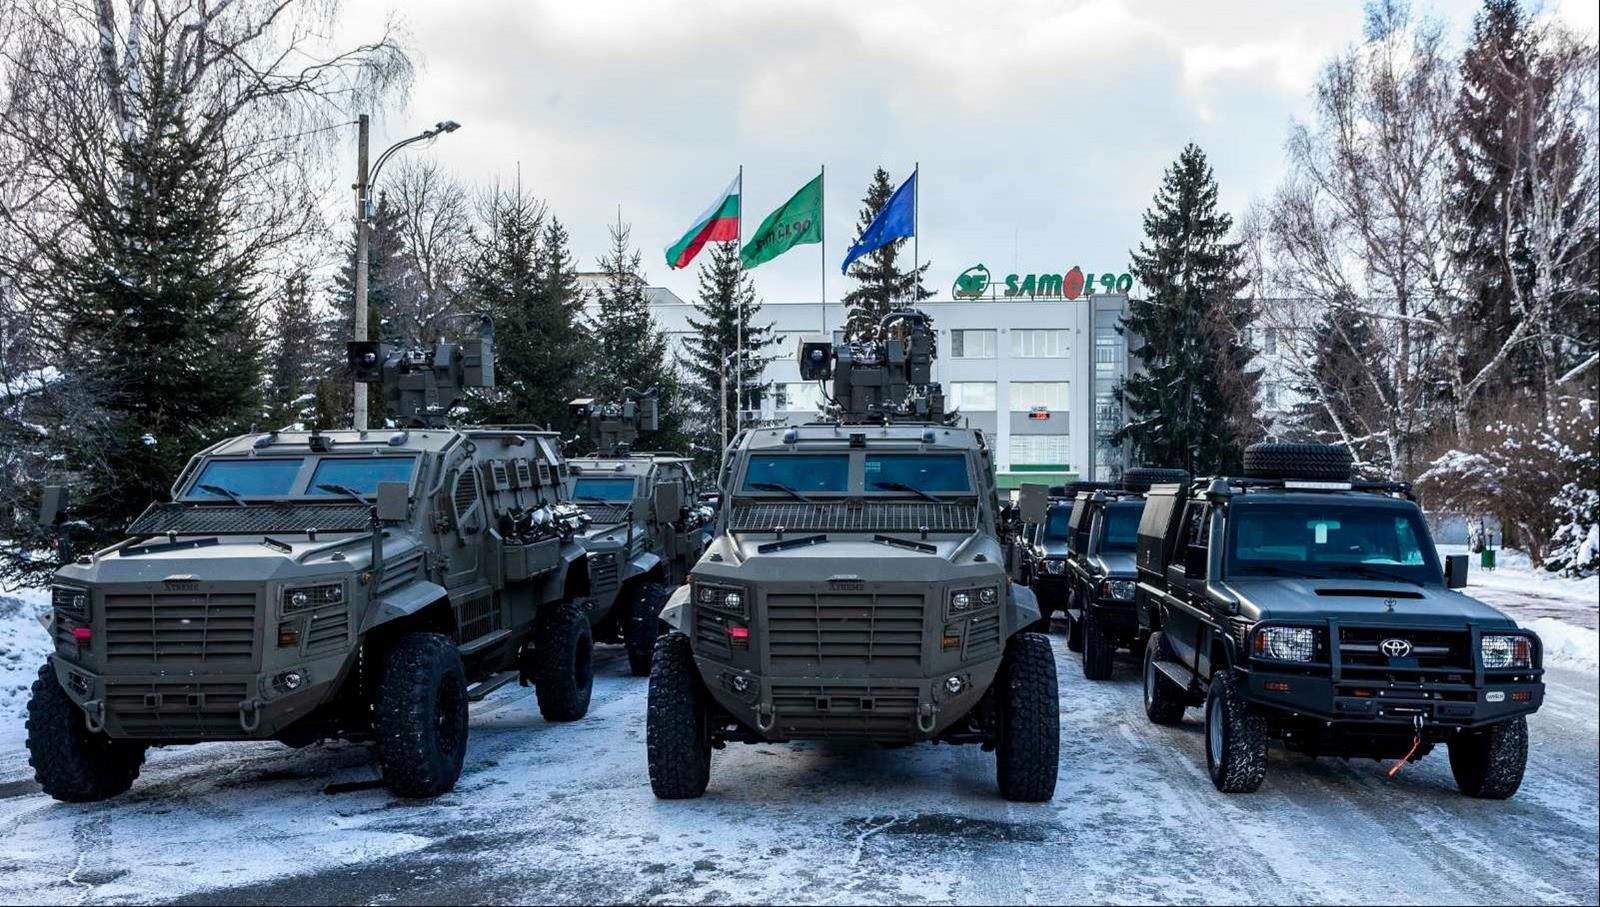 Guardian Extreme military vehicles with a remotely controlled weapon system in the hands of Bulgaria